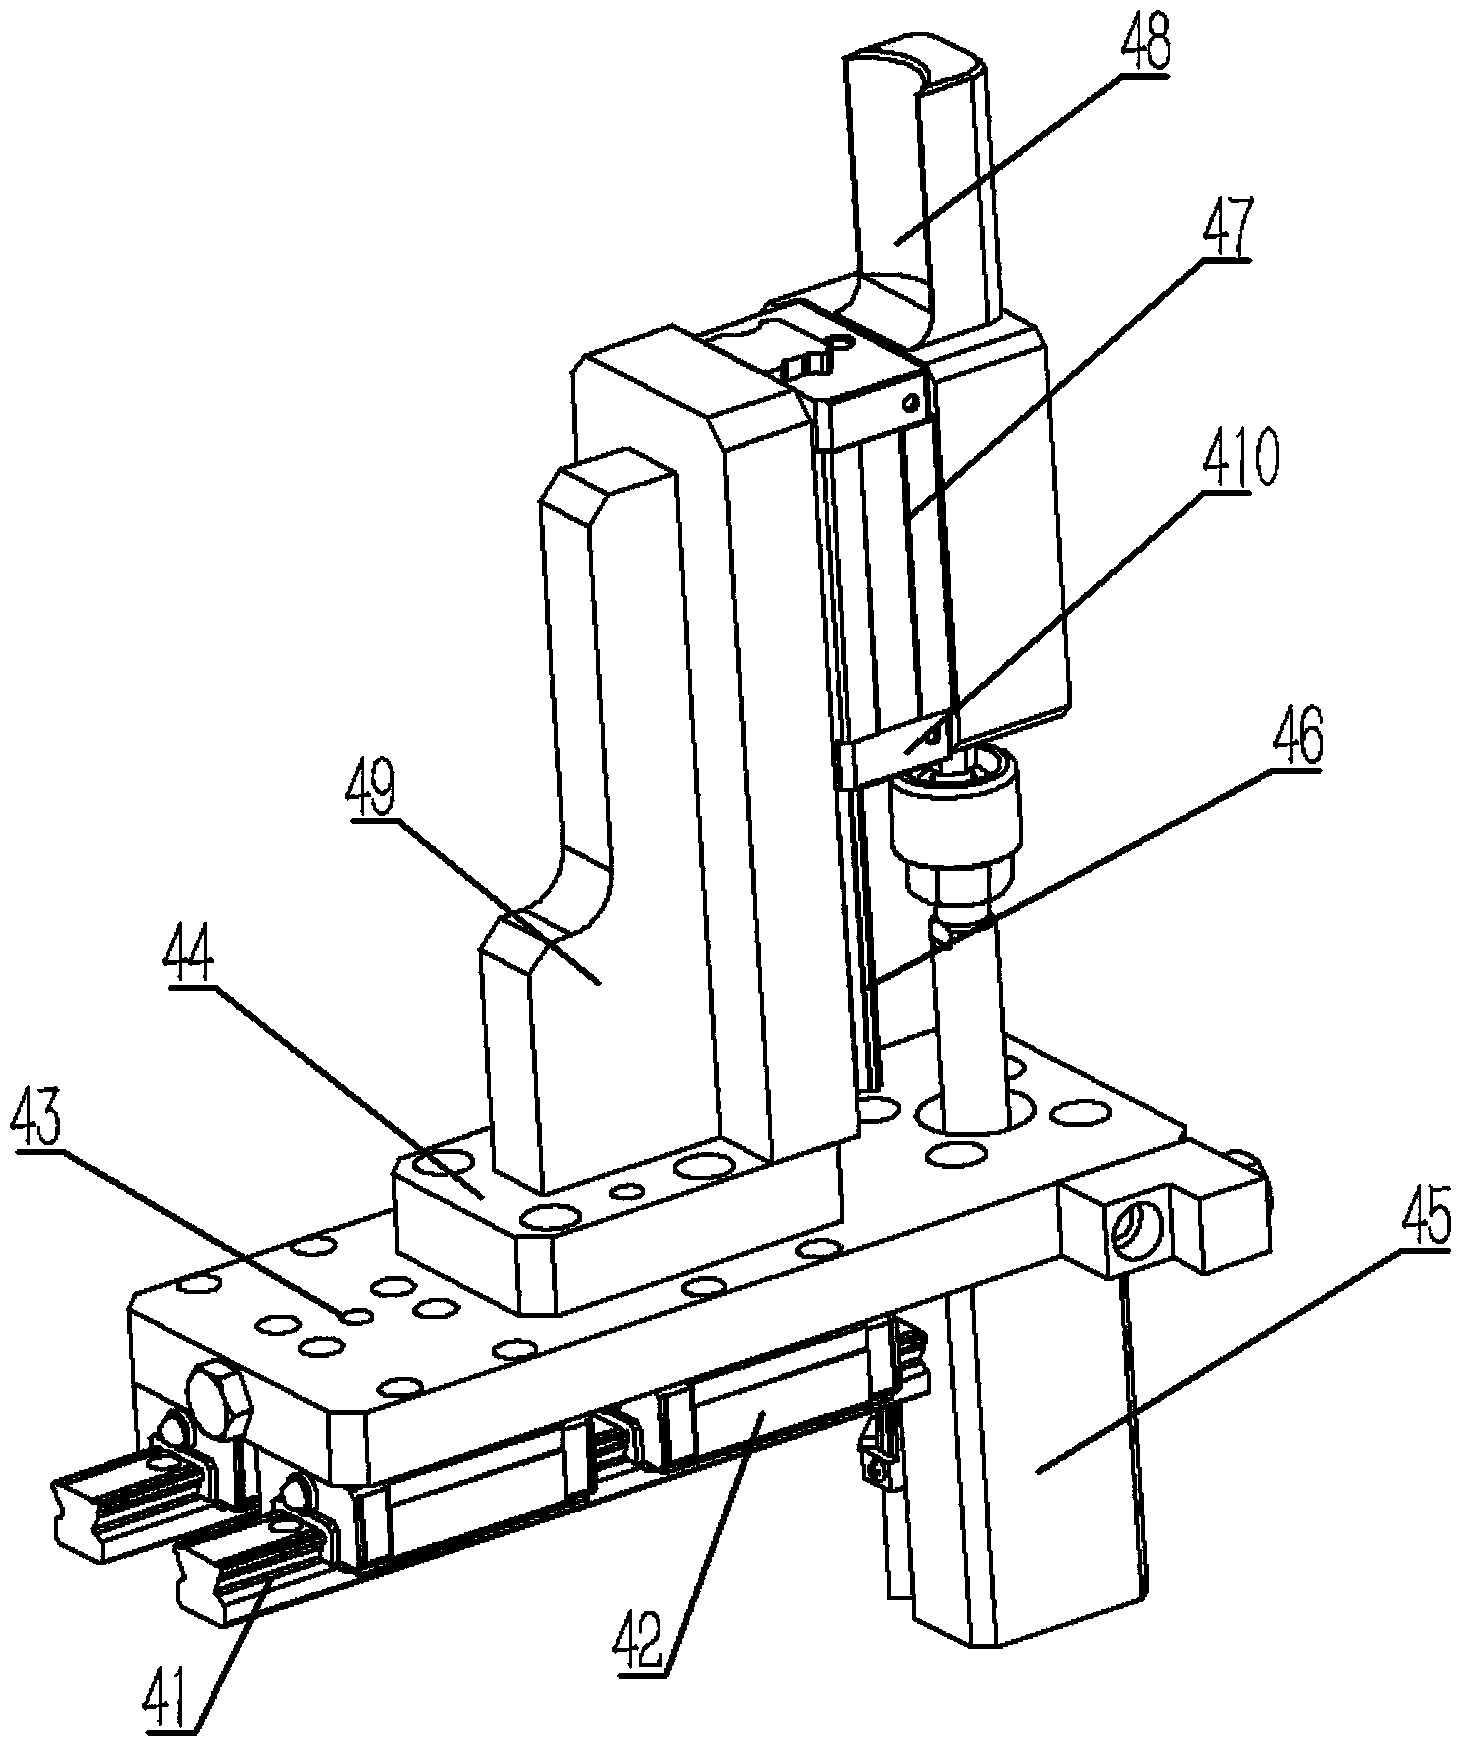 Limiting mechanism for oval press-fit machine